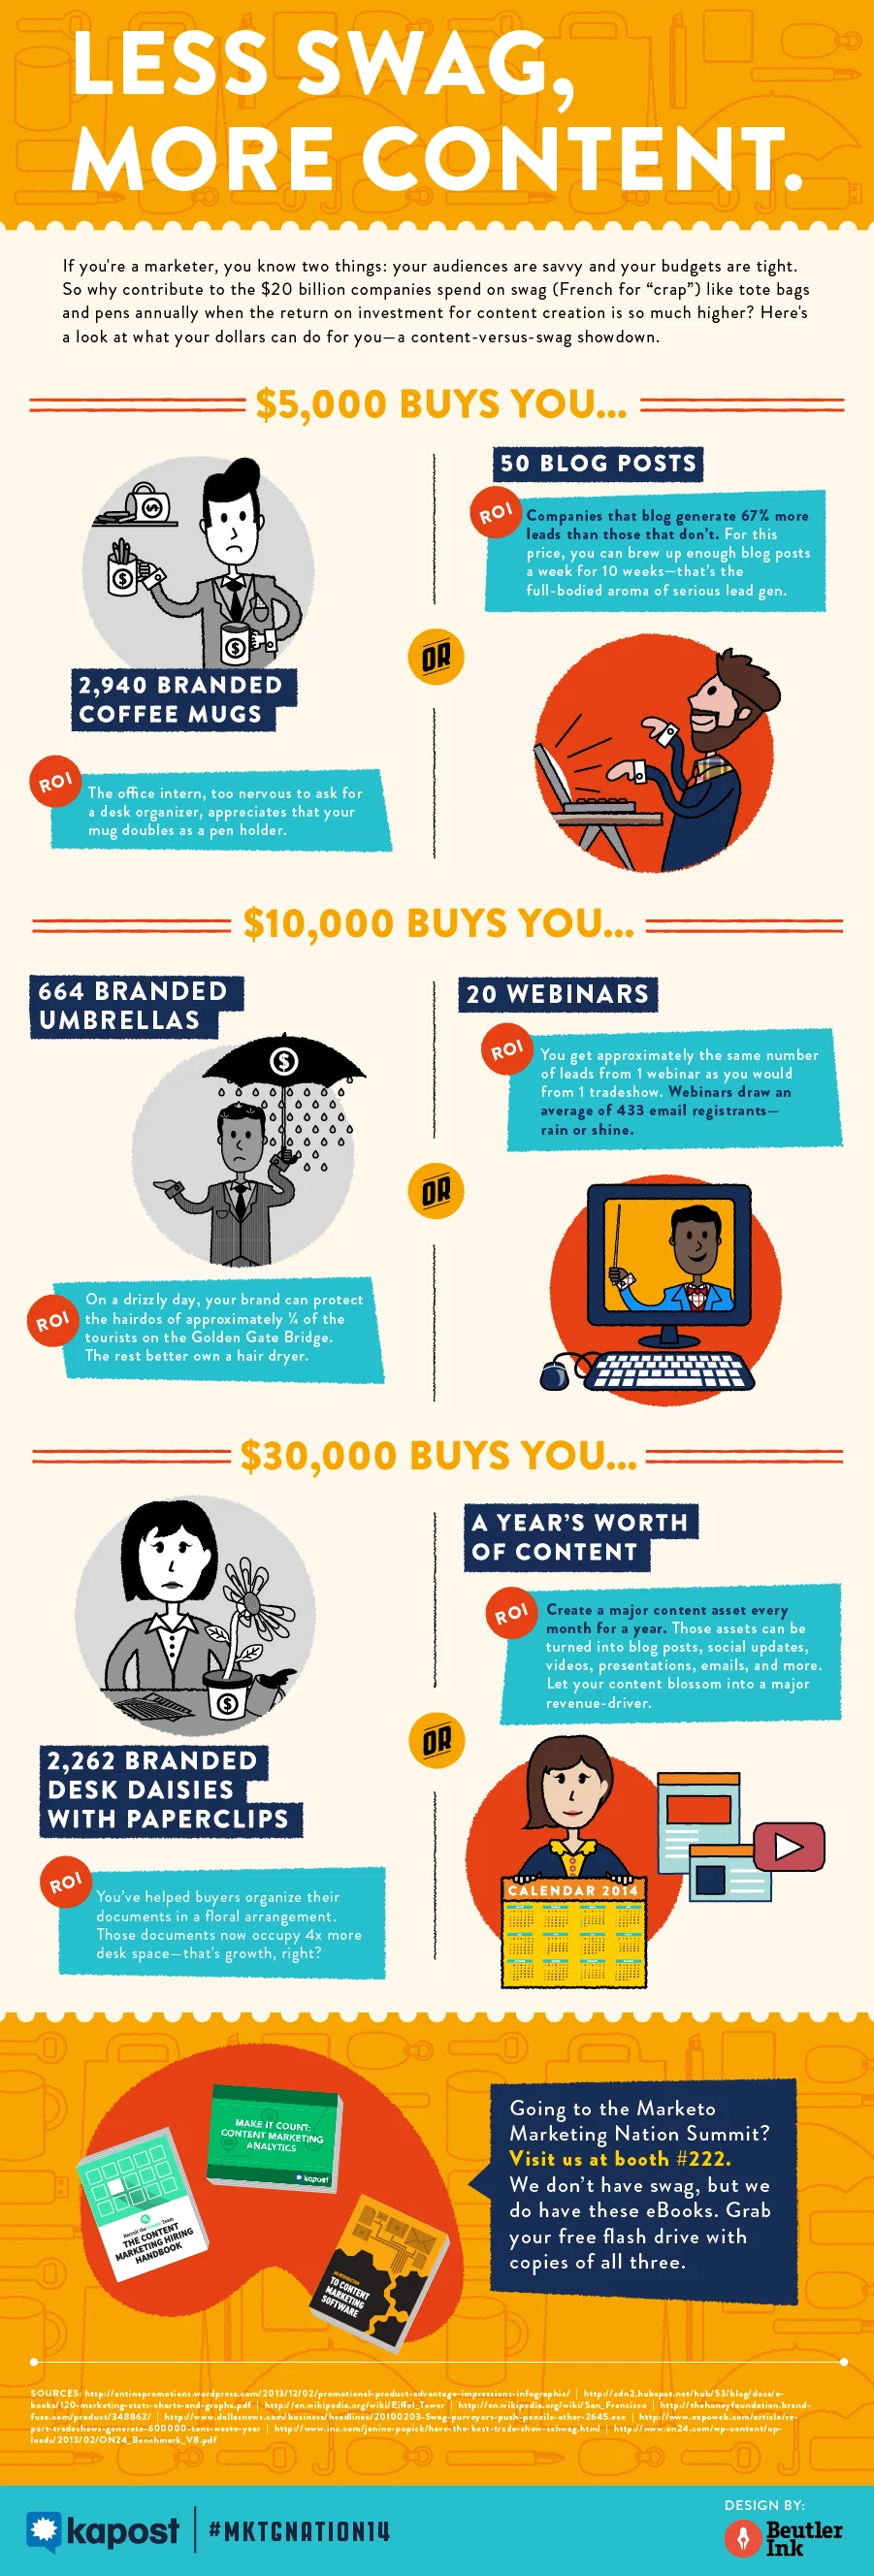 Why You Should Invest in Less Swag and More Content [INFOGRAPHIC]